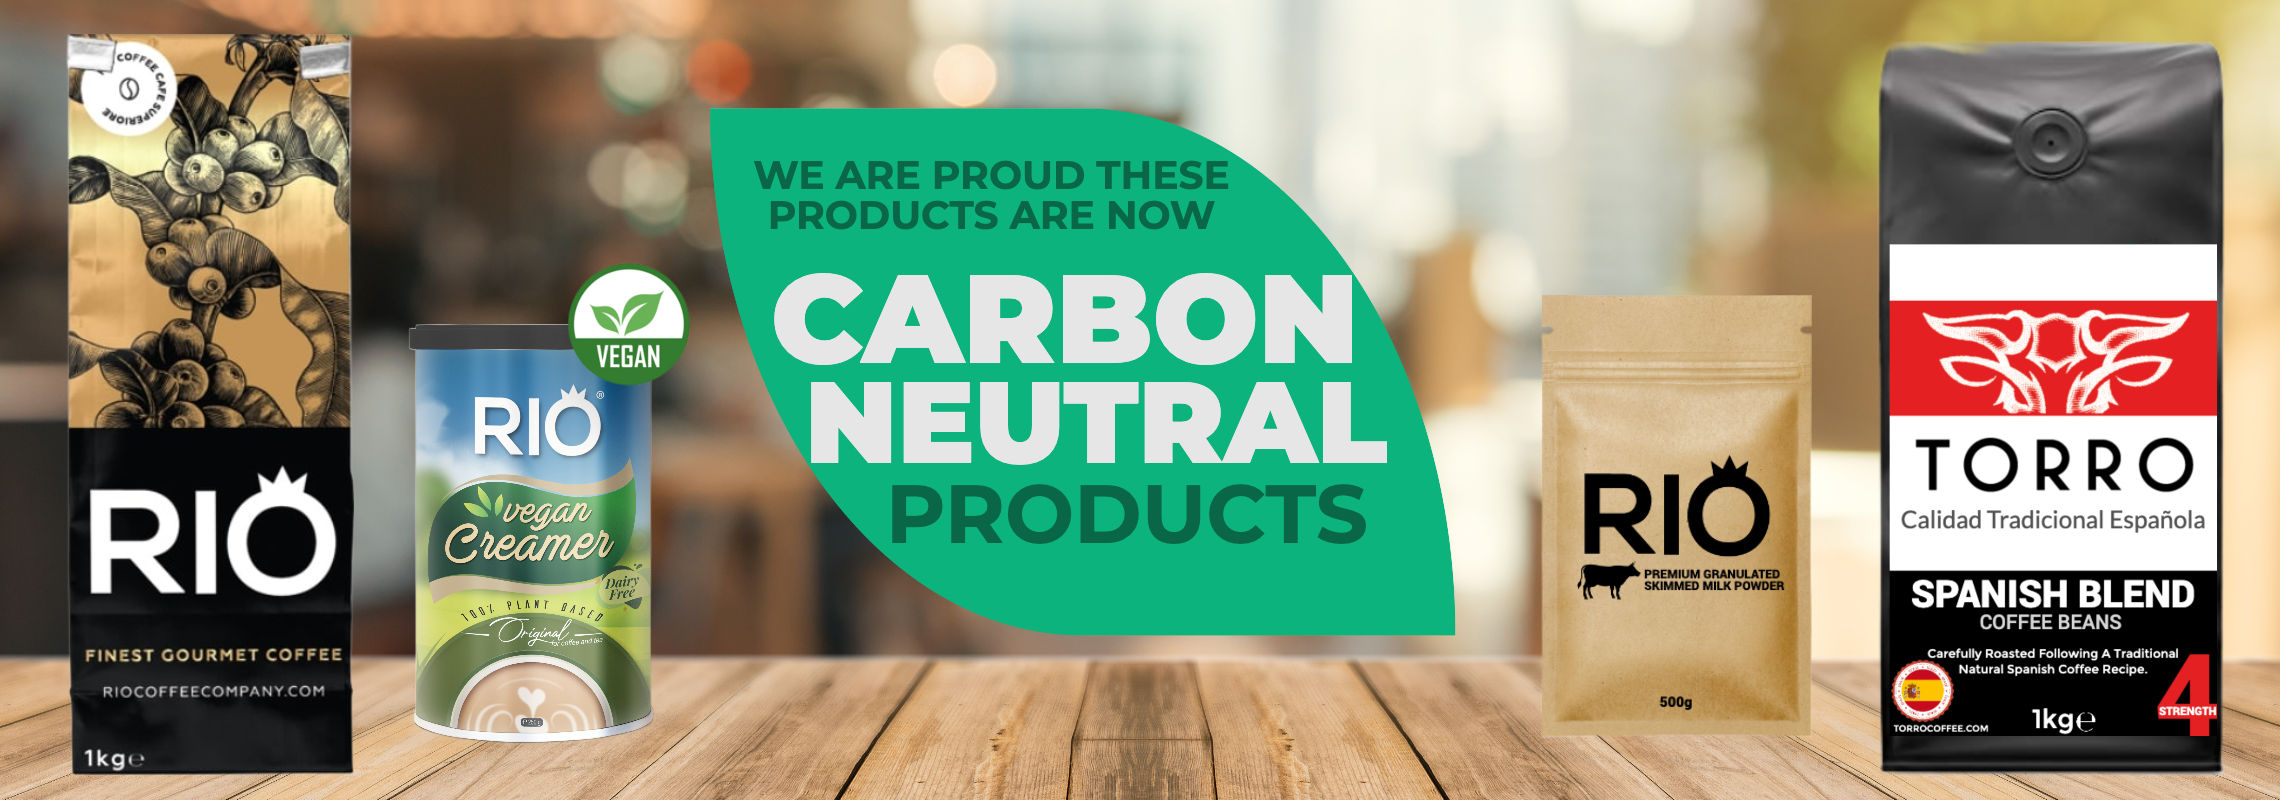 Carbon Neutral Products - Discount Coffee